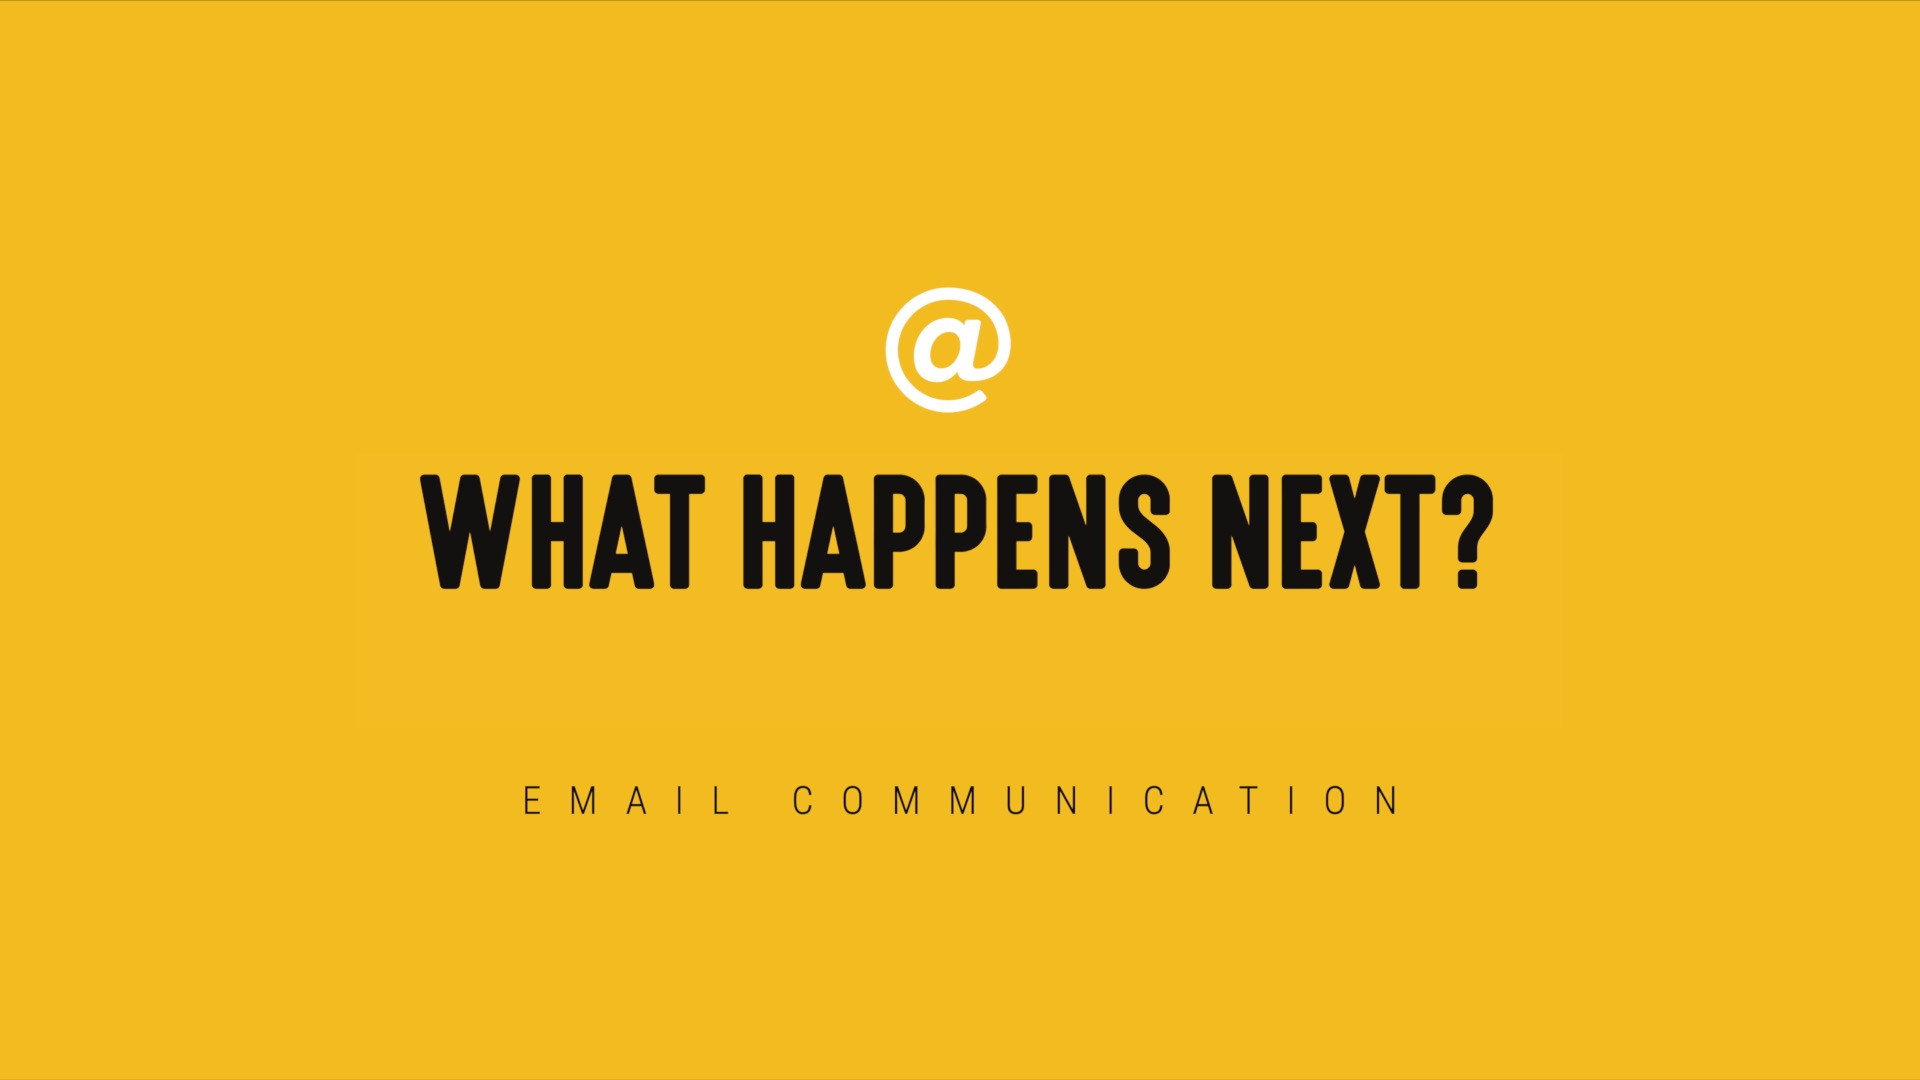 [NEW] What Happens Next? - Timely Email